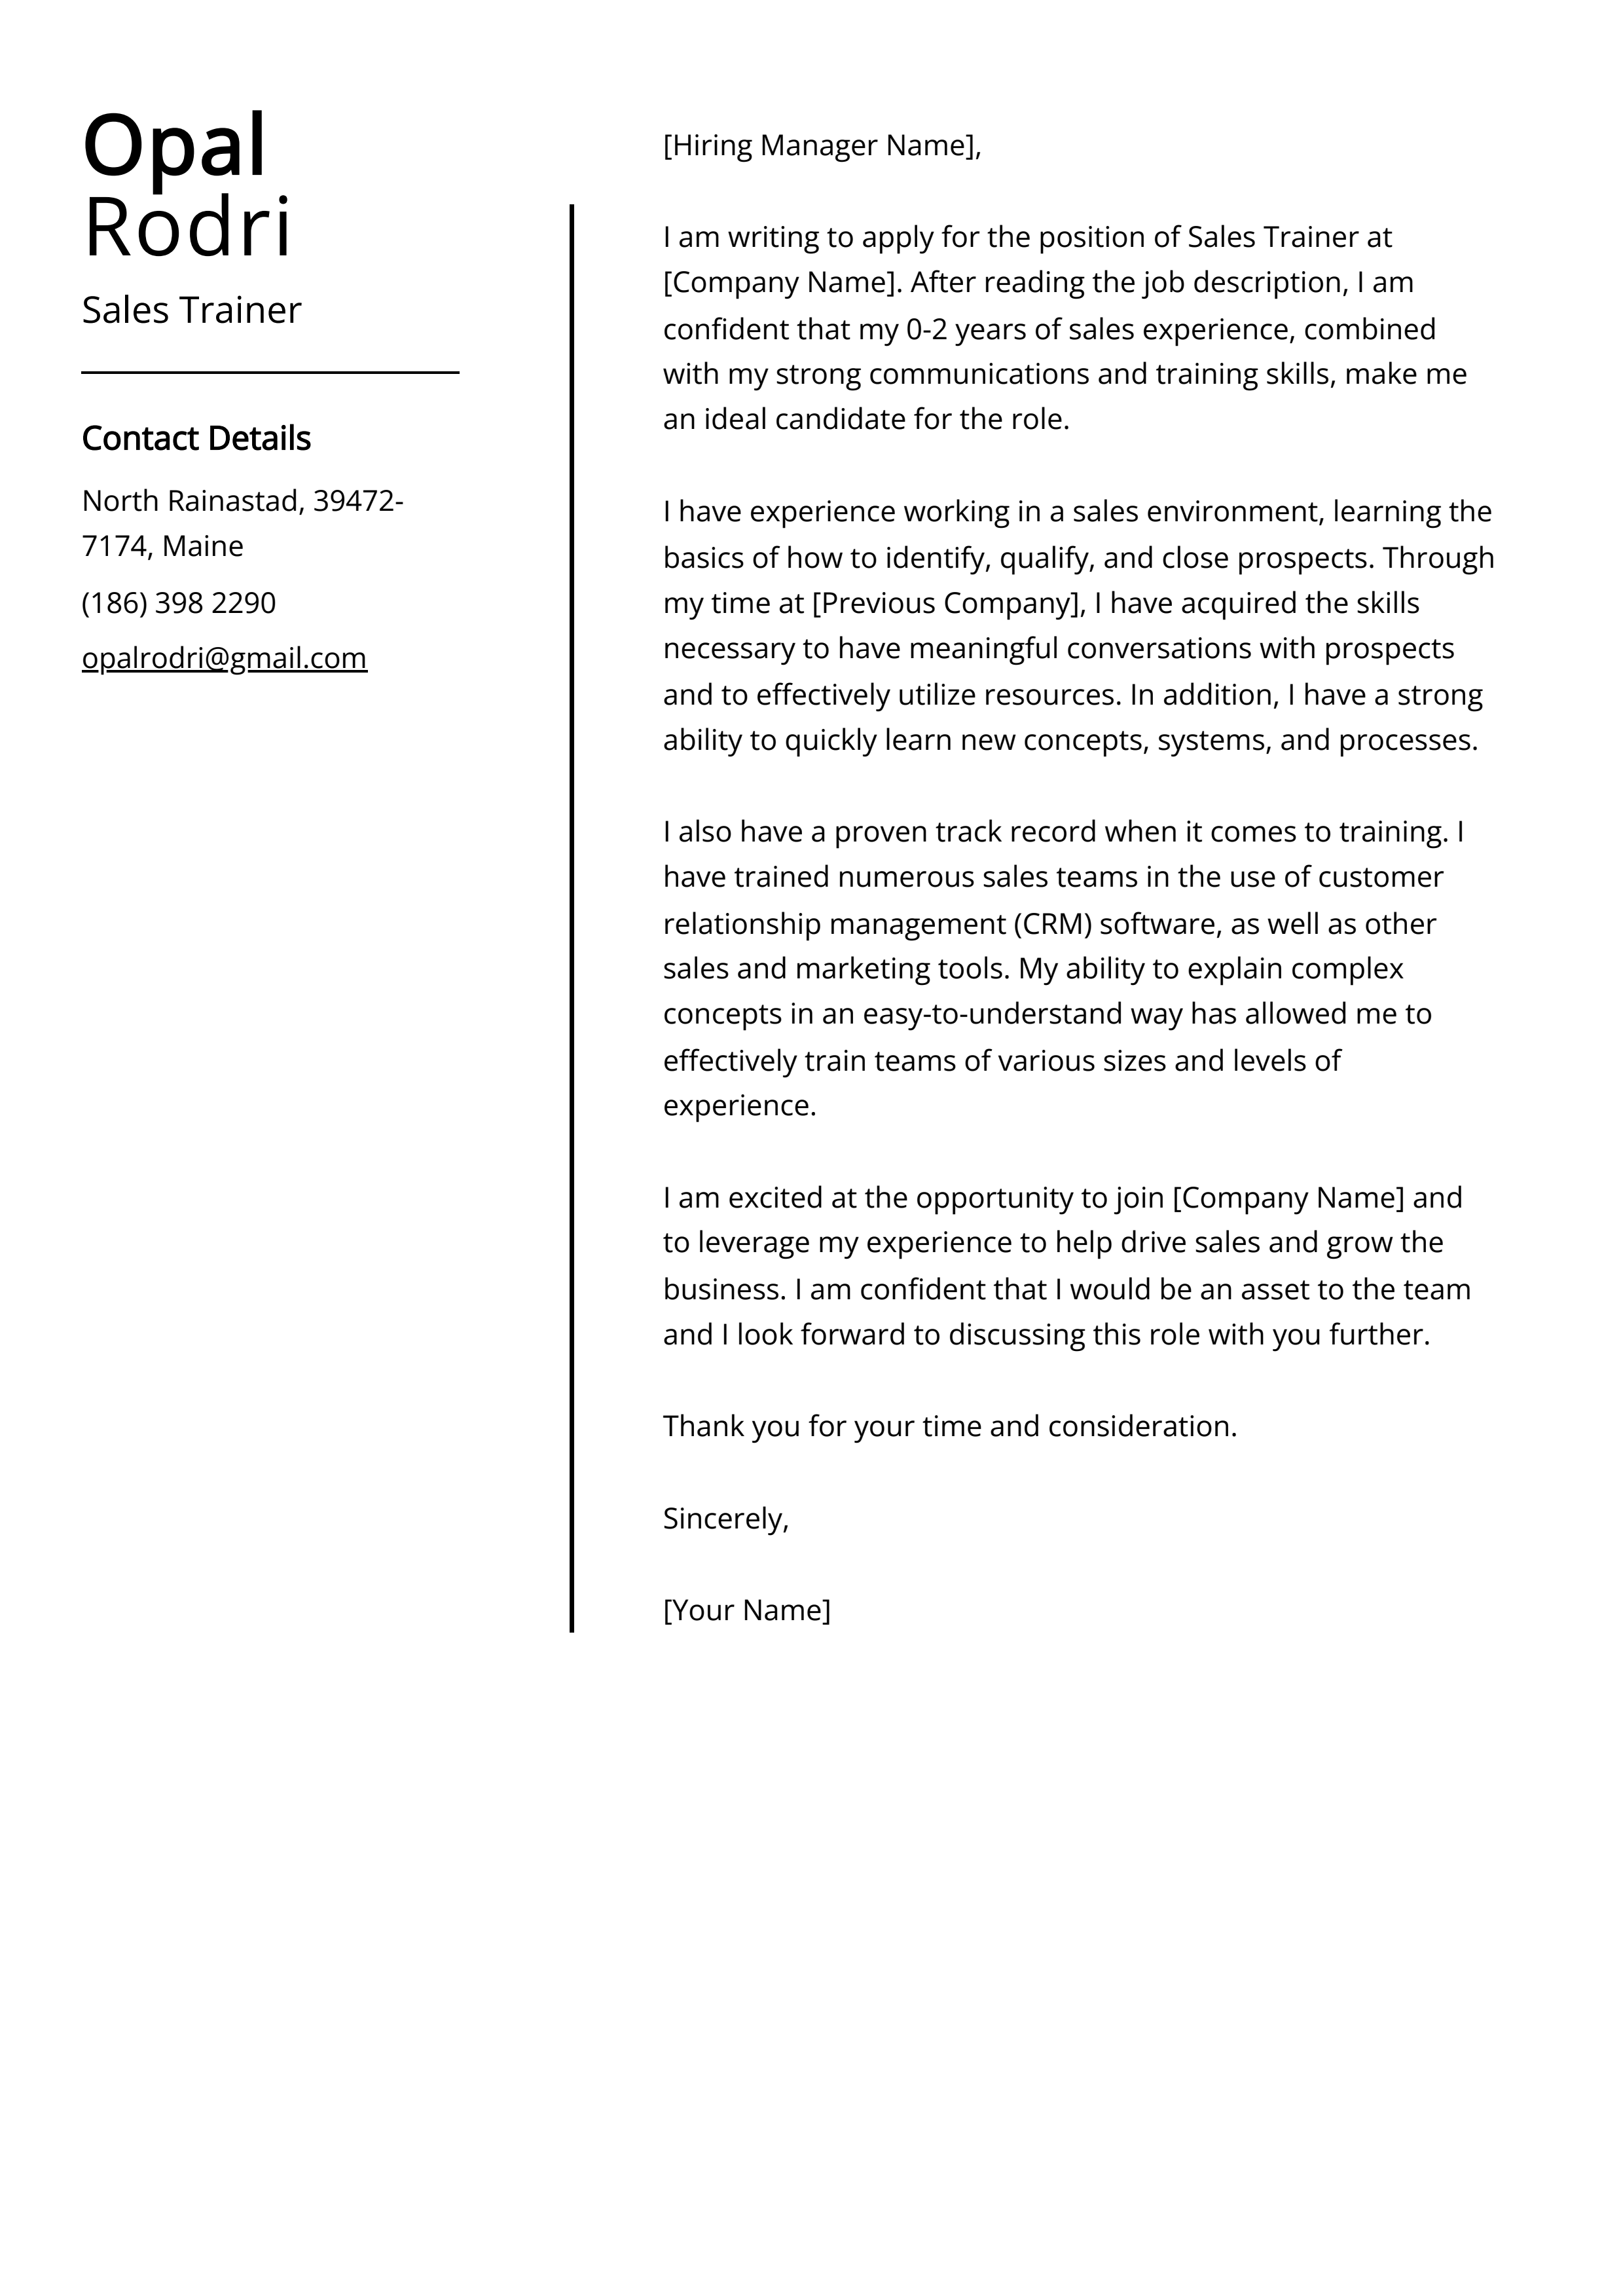 Sales Trainer Cover Letter Example